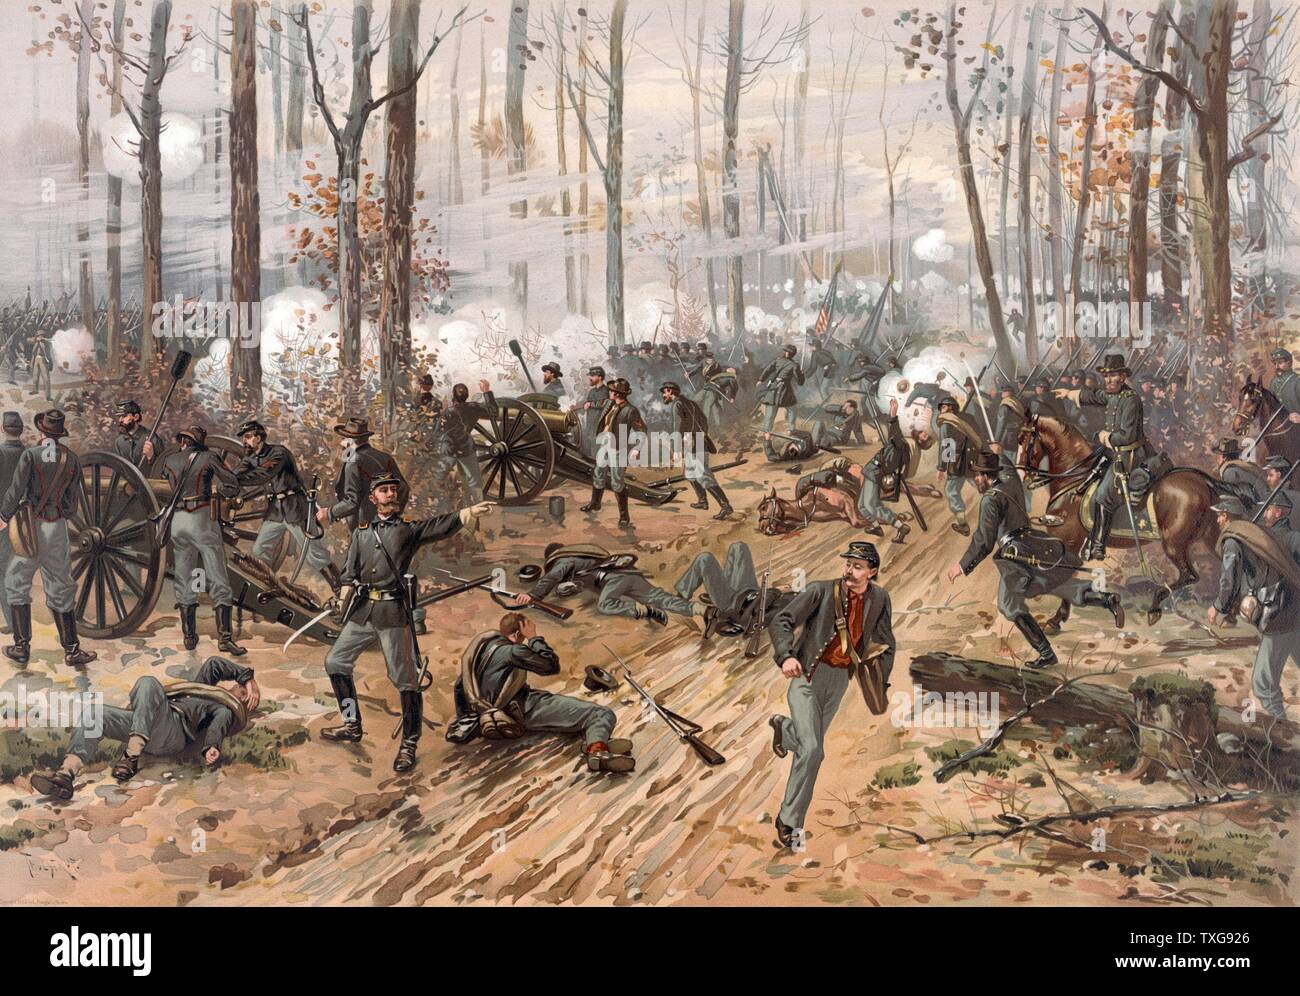 Battle of Shiloh (Battle of Pittsburgh Landing), Tennessee, 6-7 April 1862 Major battle in American Civil War (1861-1865). Ulysses S. Grant directing his Union troops to victory against the Confederates After painting by Thure deThulstrup Stock Photo